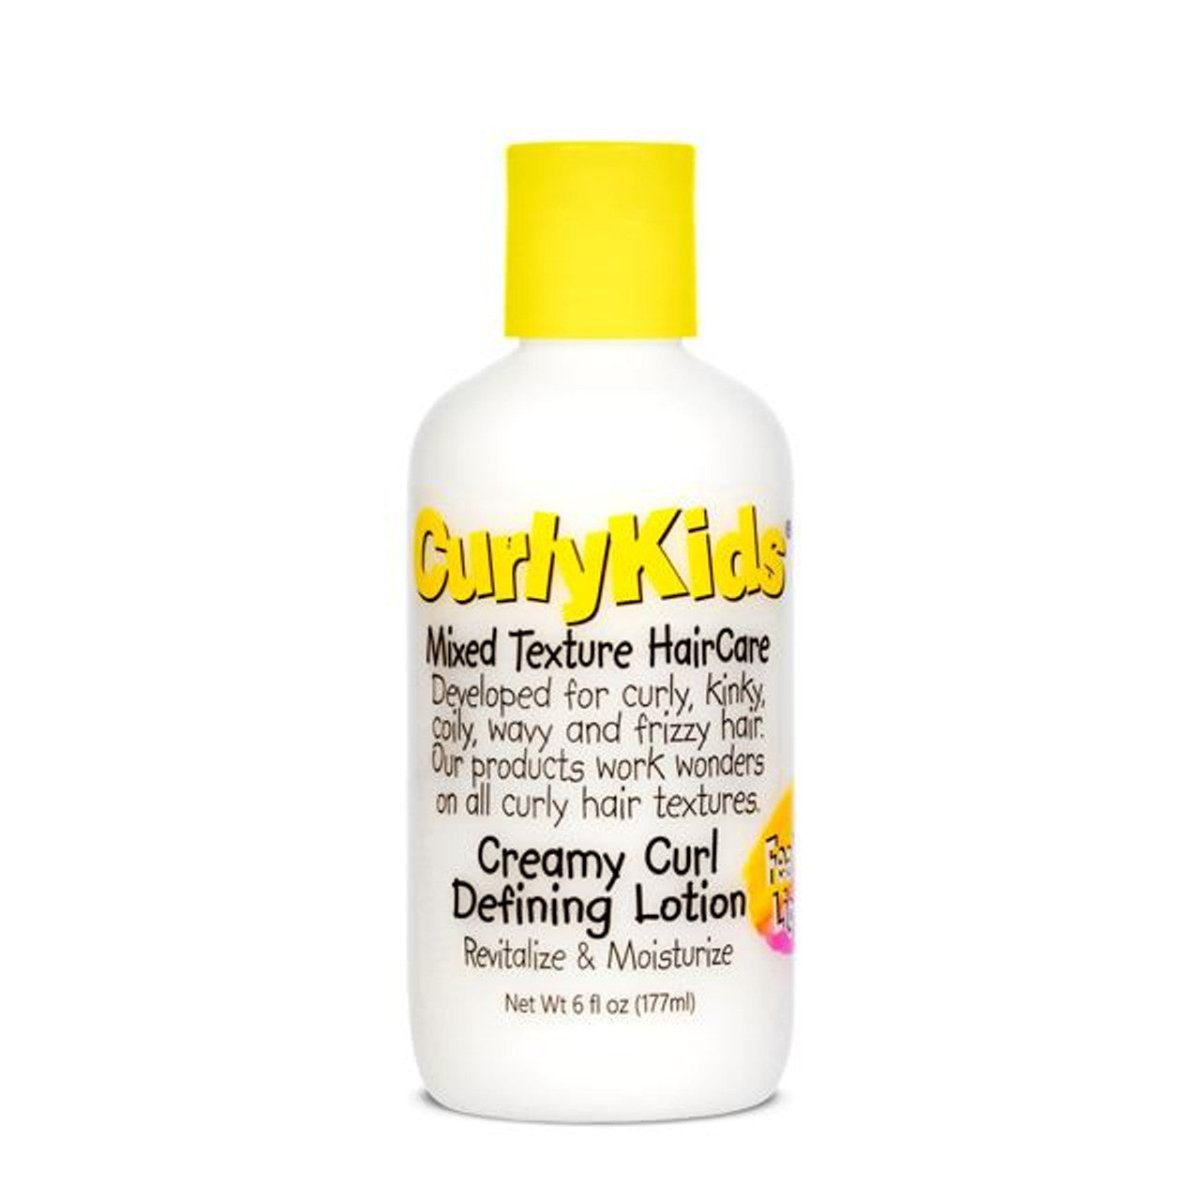 Curly Kids Mixed Hair Haircare Curly Defining Lotion 6oz - Southwestsix Cosmetics Curly Kids Mixed Hair Haircare Curly Defining Lotion 6oz Curly Kids Southwestsix Cosmetics 857361004273 Curly Kids Mixed Hair Haircare Curly Defining Lotion 6oz